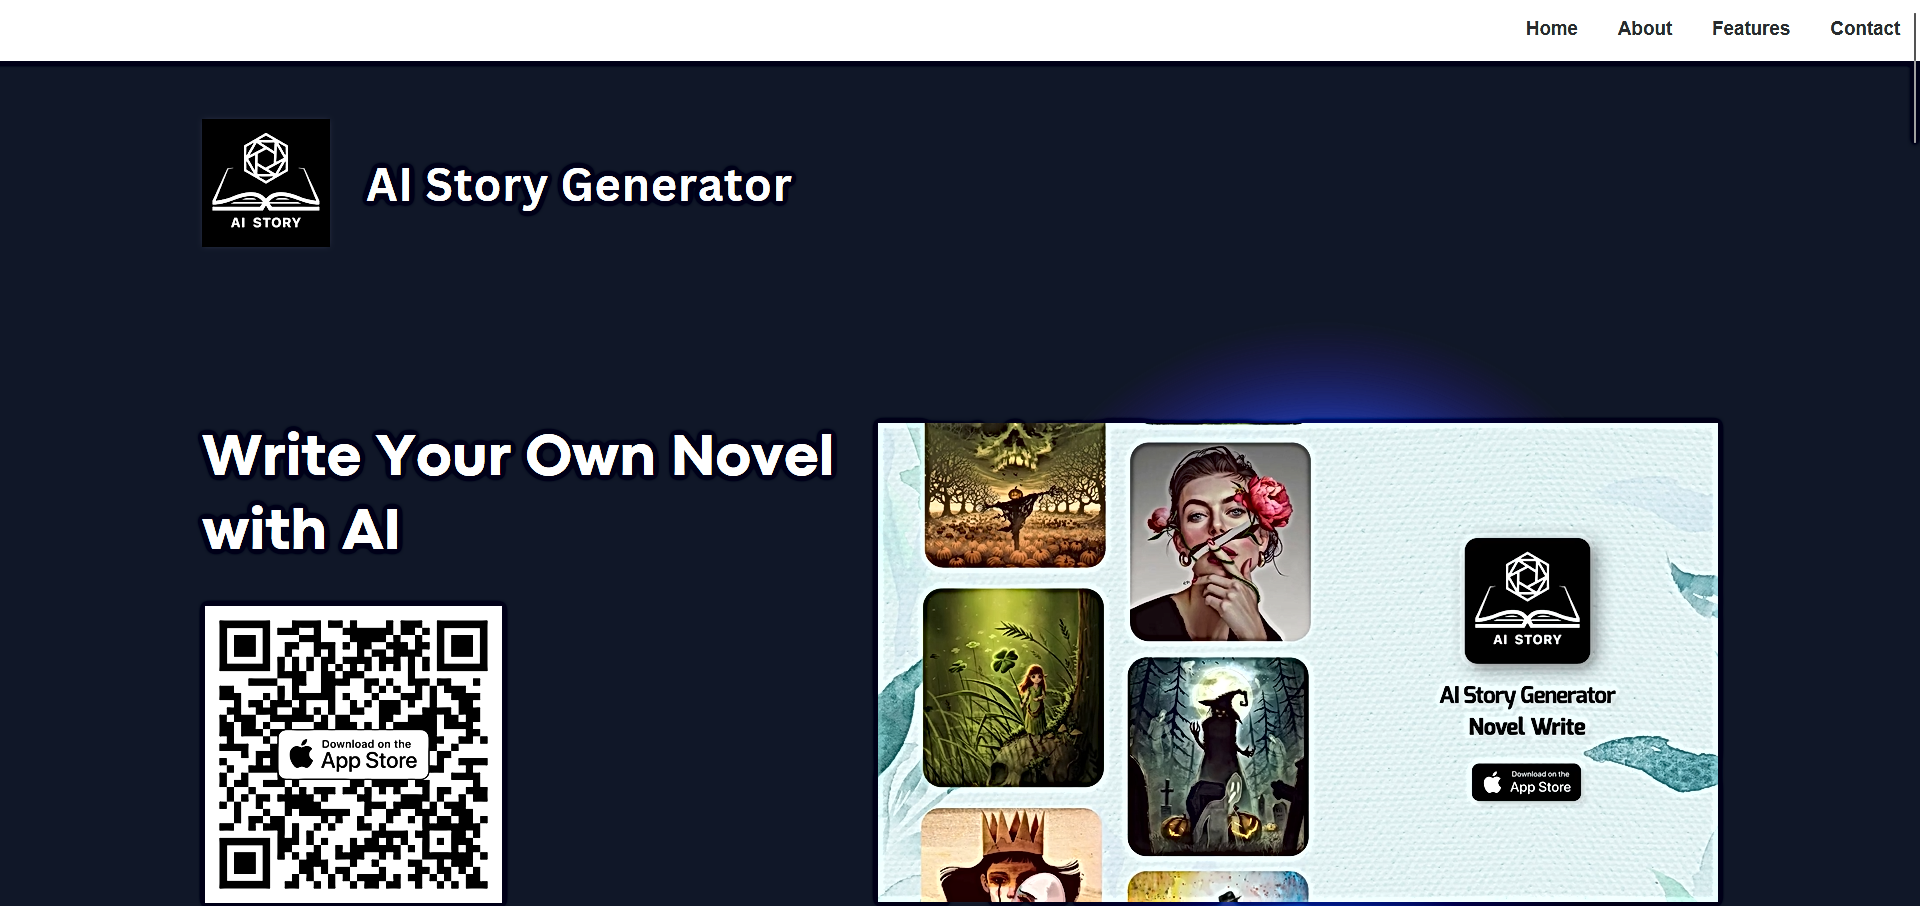 AI Story Generator featured